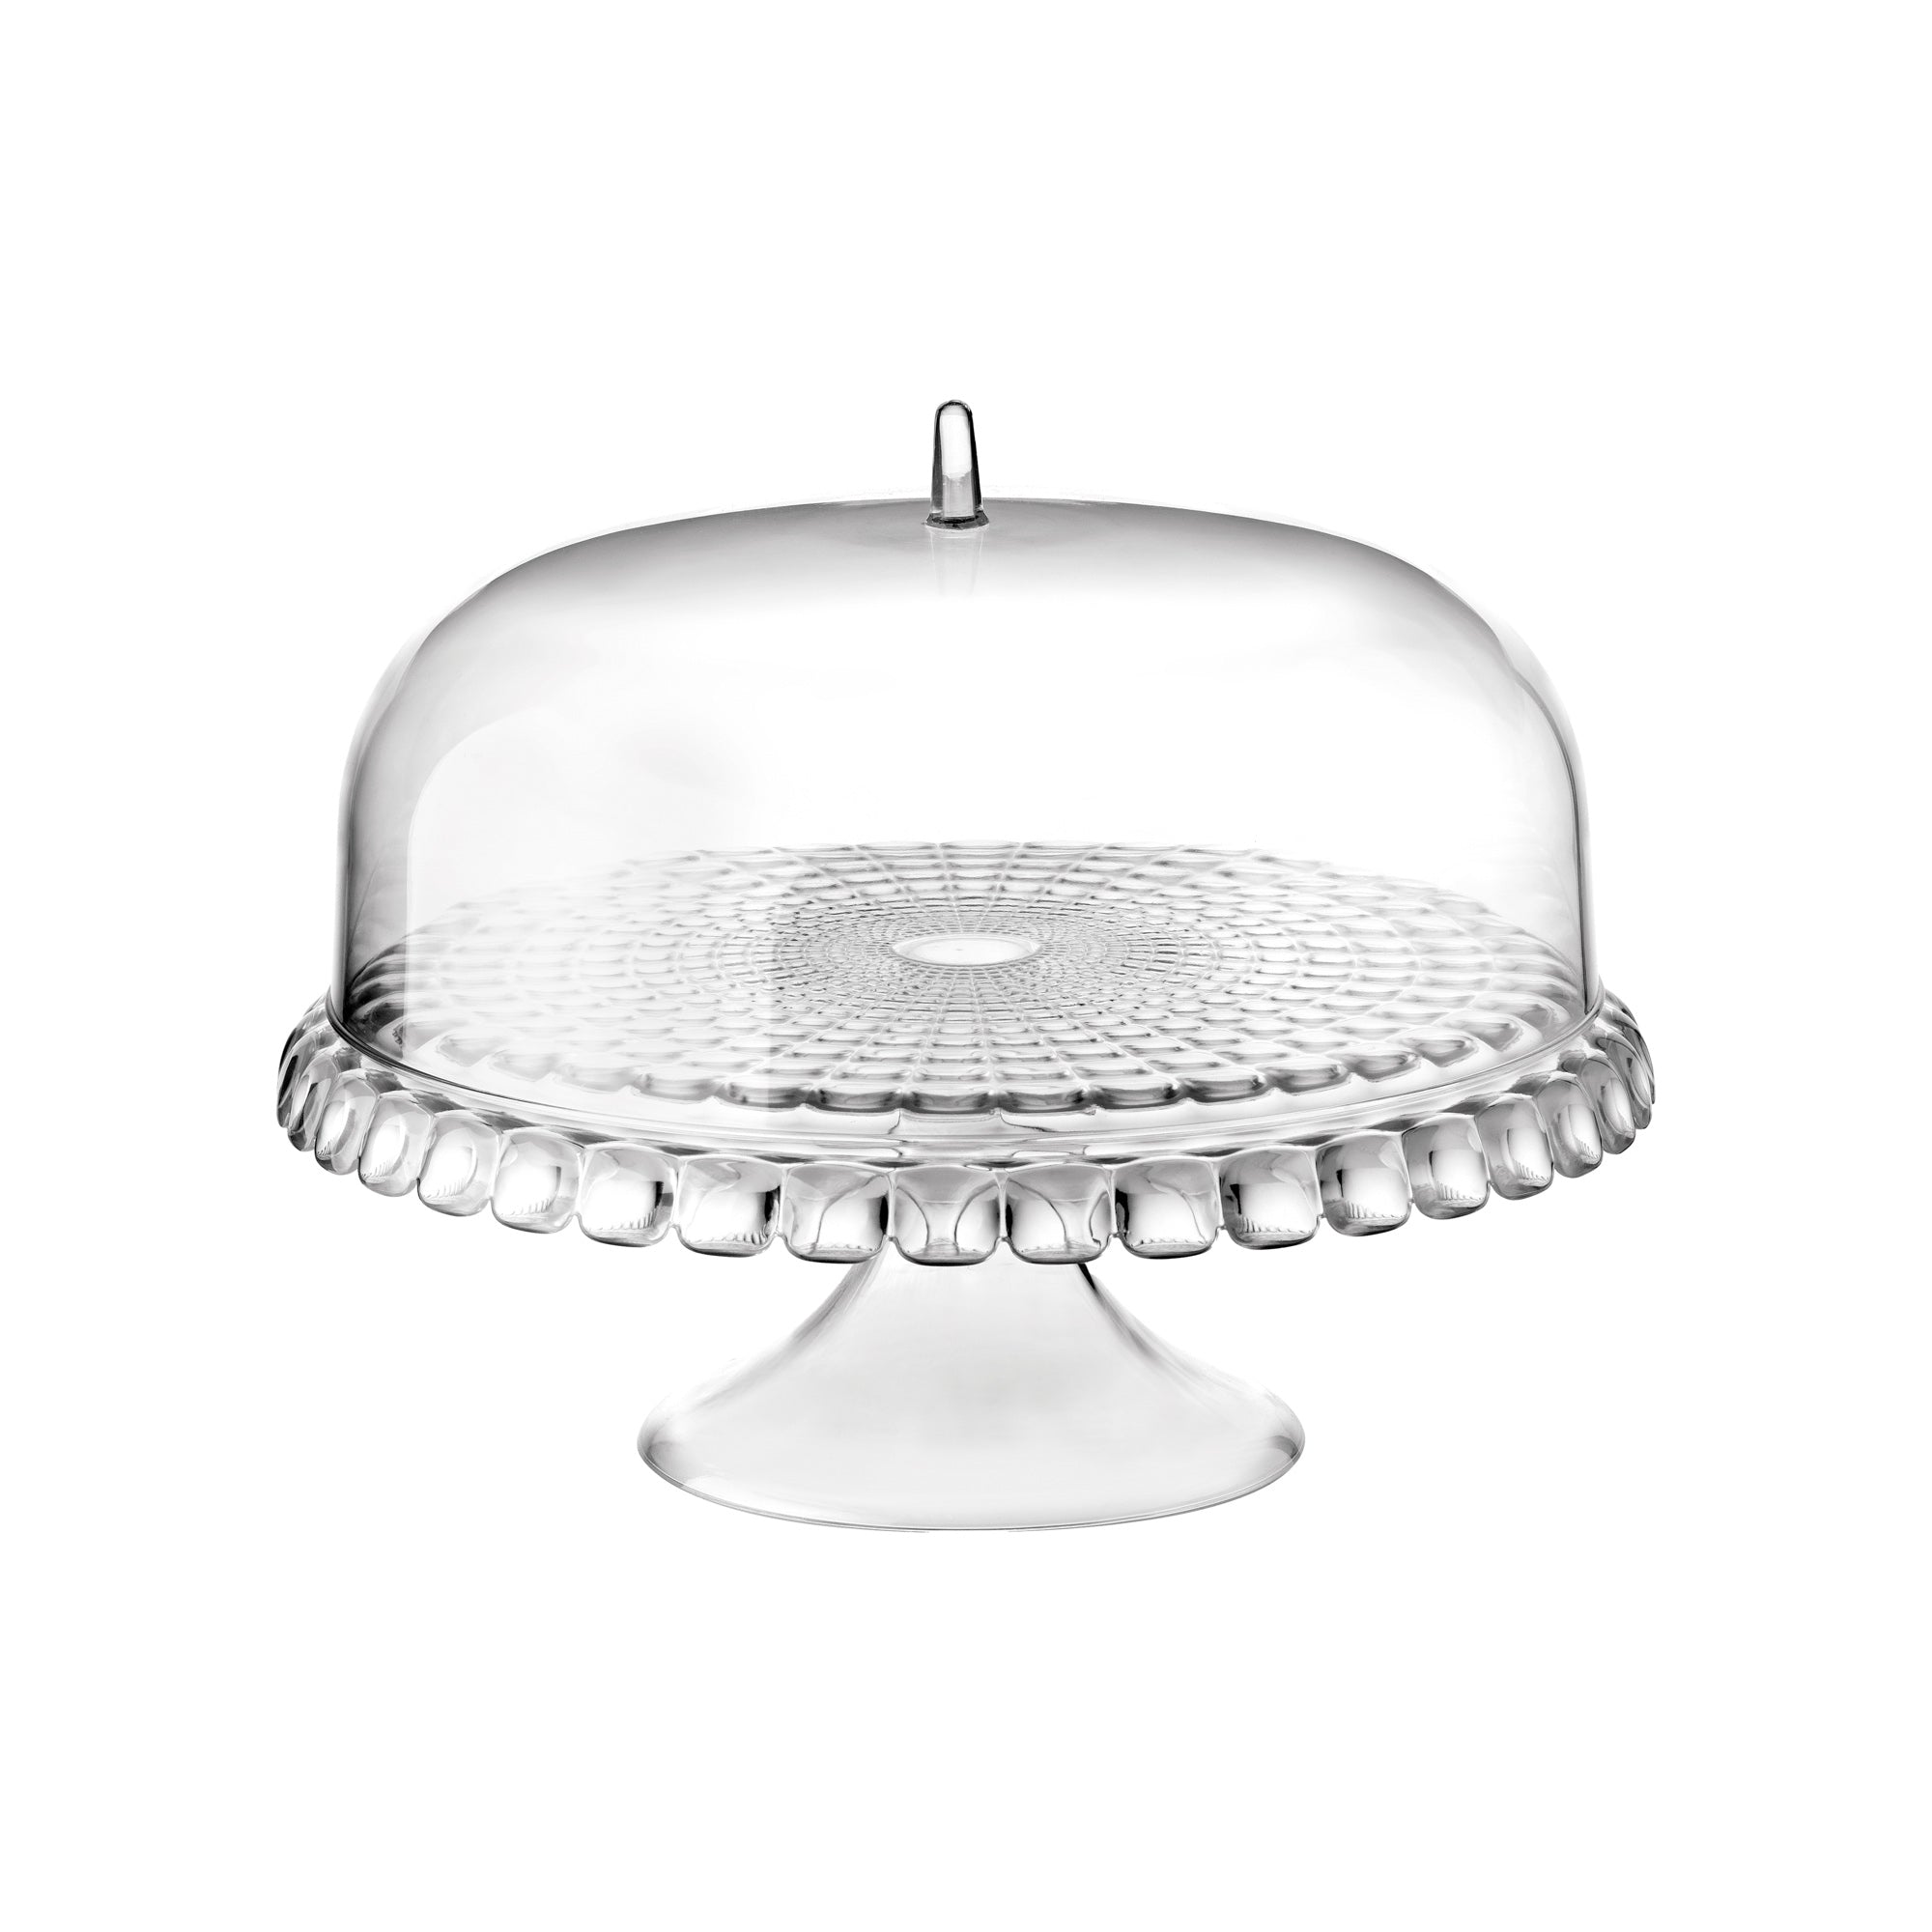 CAKE STAND WITH DOME "TIFFANY"